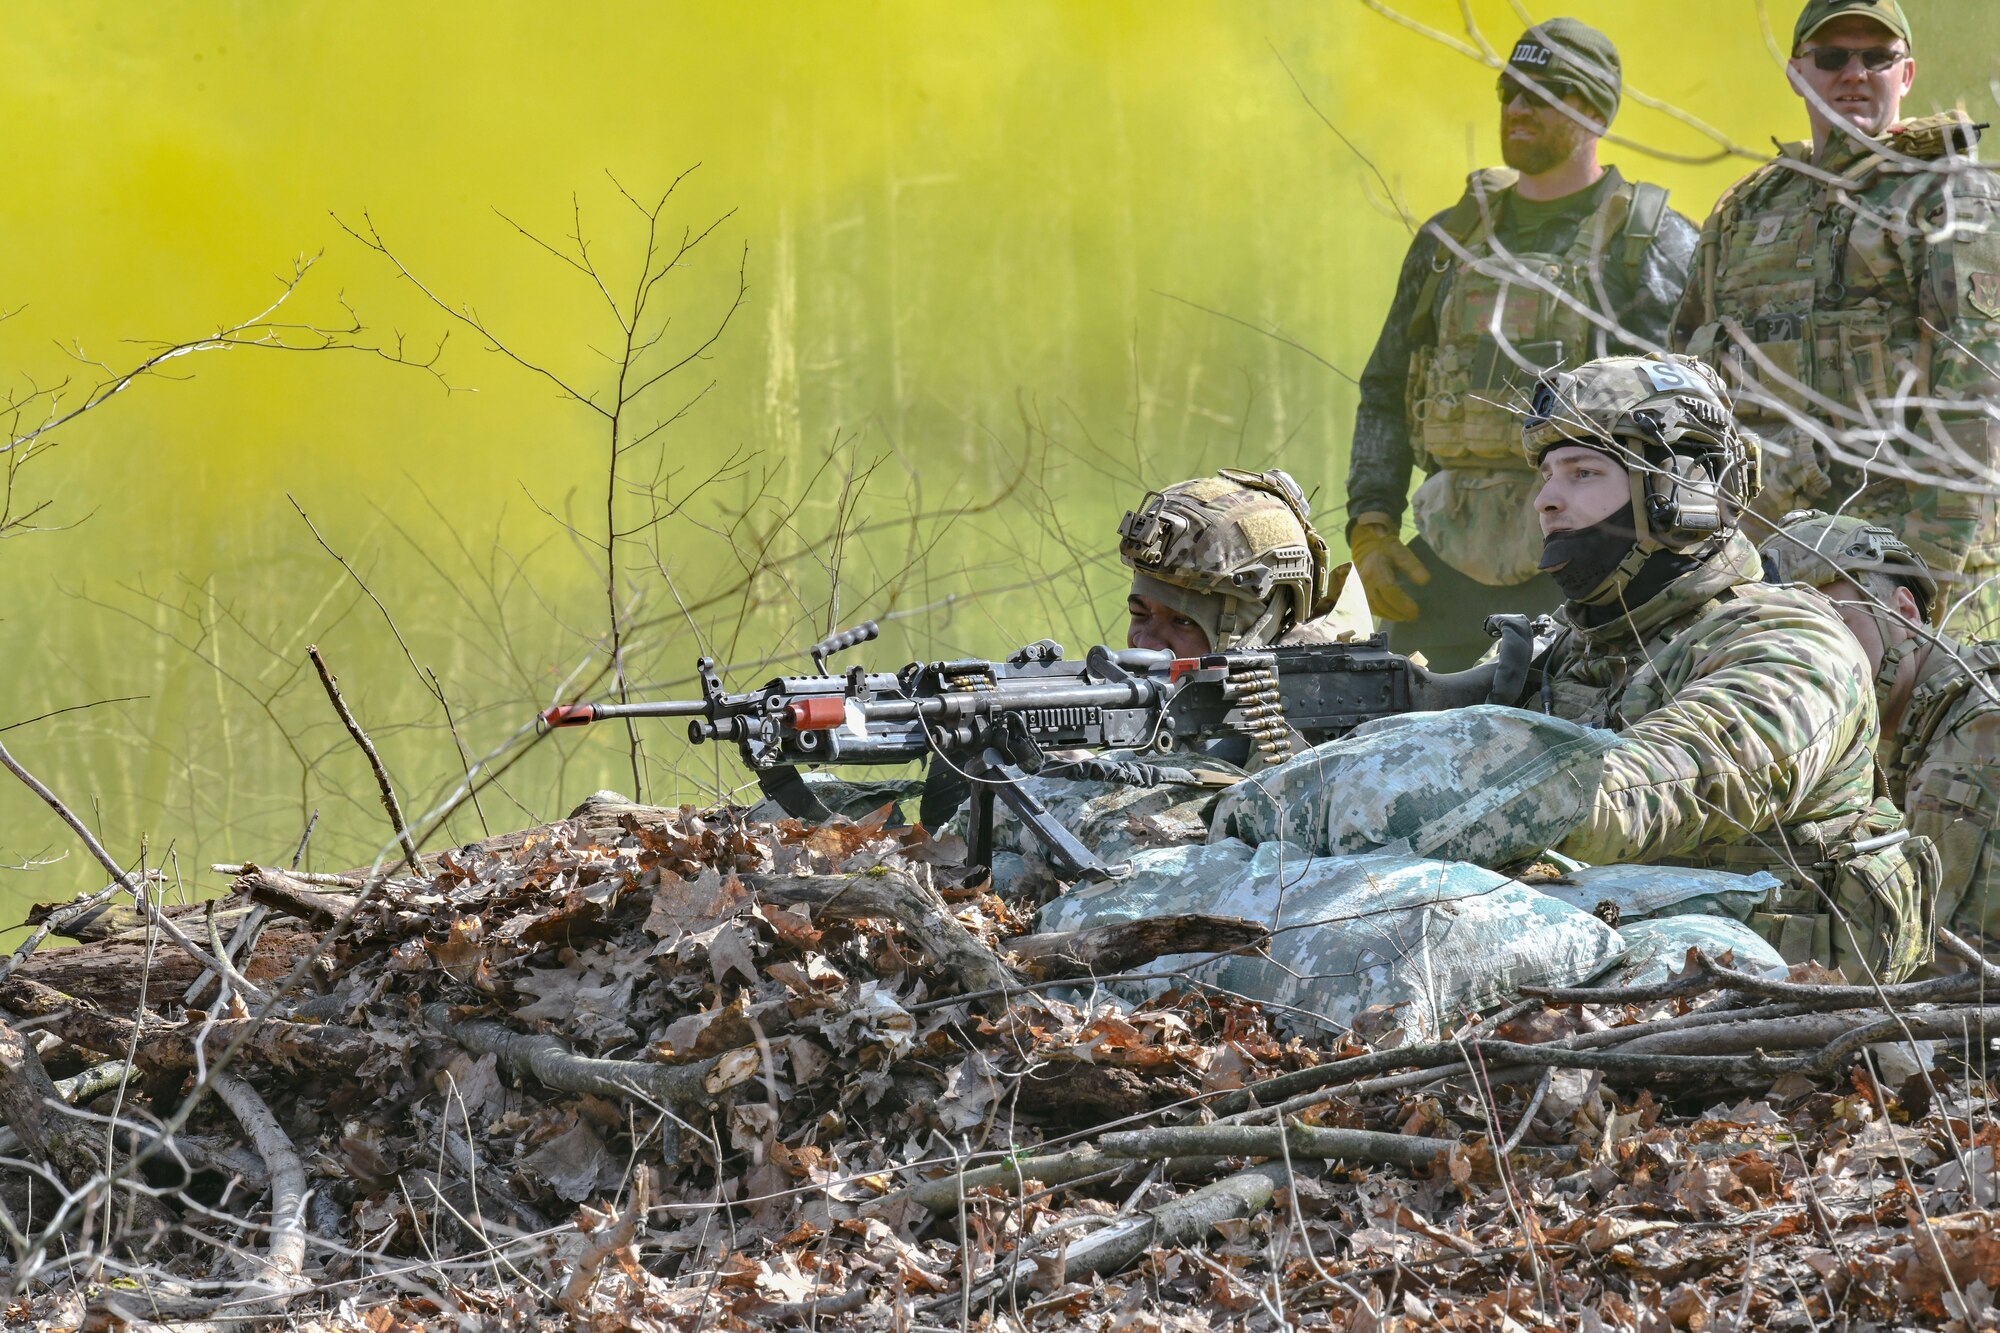 Reserve Citizen Airmen assigned to the 459th Security Forces Squadron, Joint Base Andrews, Maryland, fire a M240B machine gun and a M249 light machine gun during a static defense exercise on March 20, 2023, at Camp James A. Garfield Joint Military Training Center, Ohio.